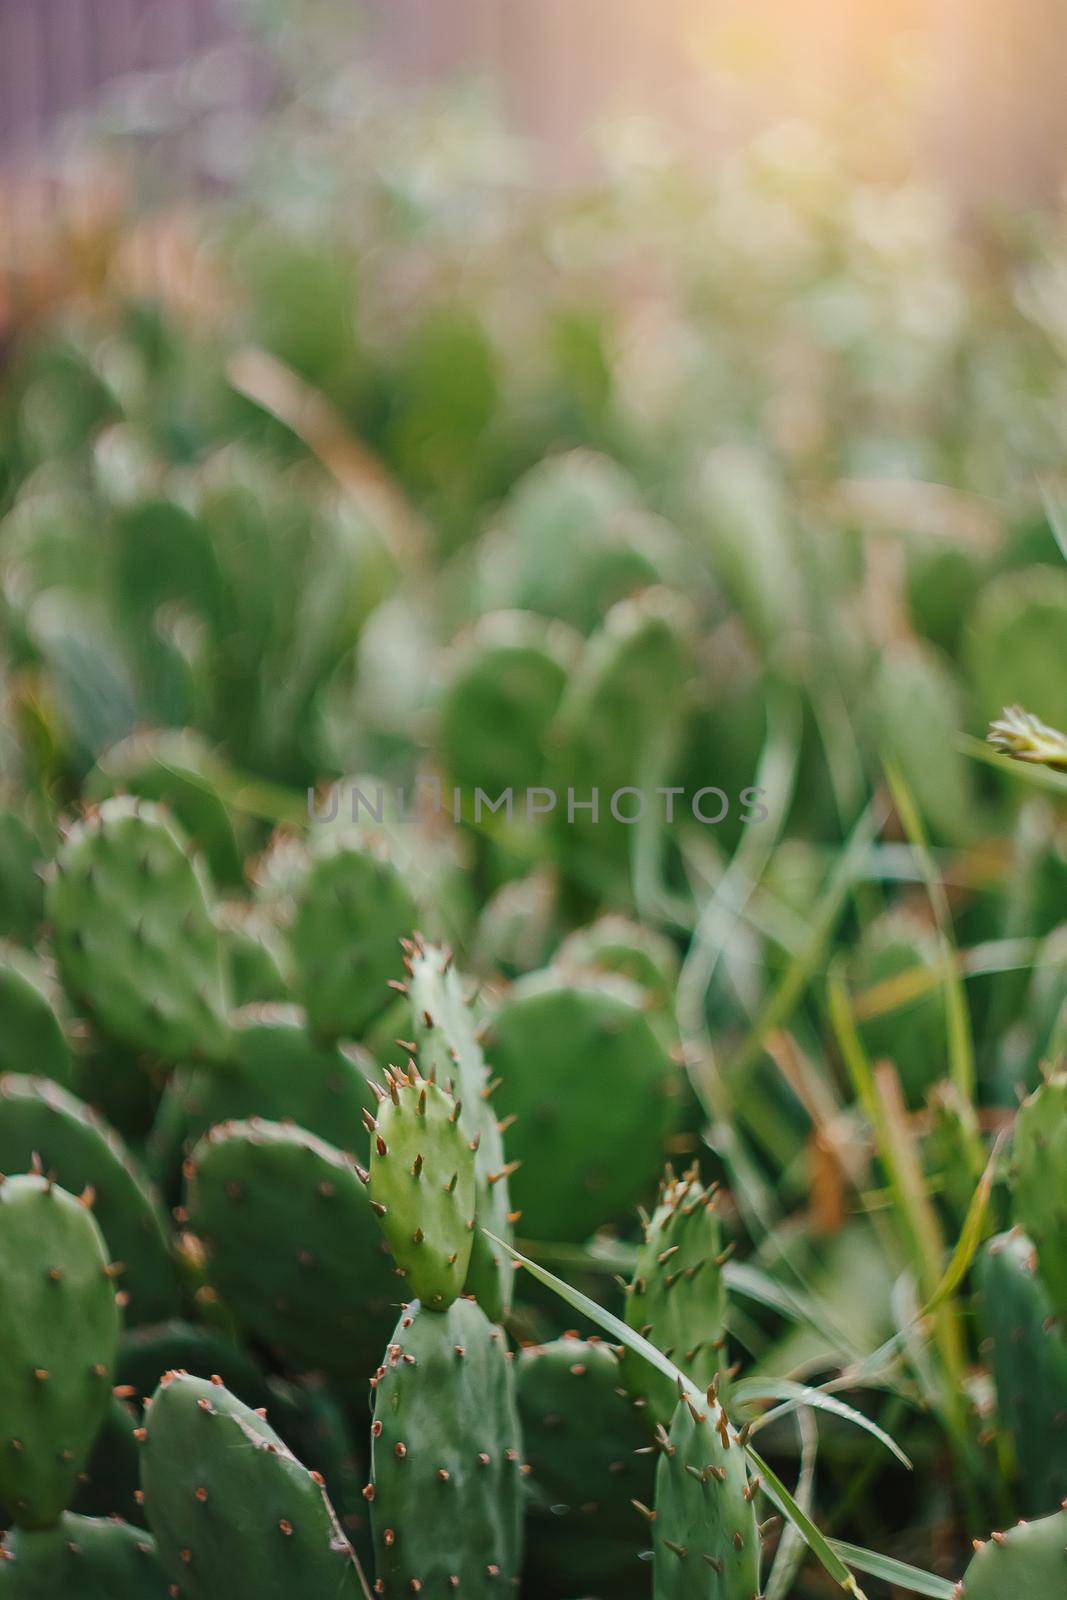 Details of wild cactus vegetation on a sunny day. Succulents in natural condition.